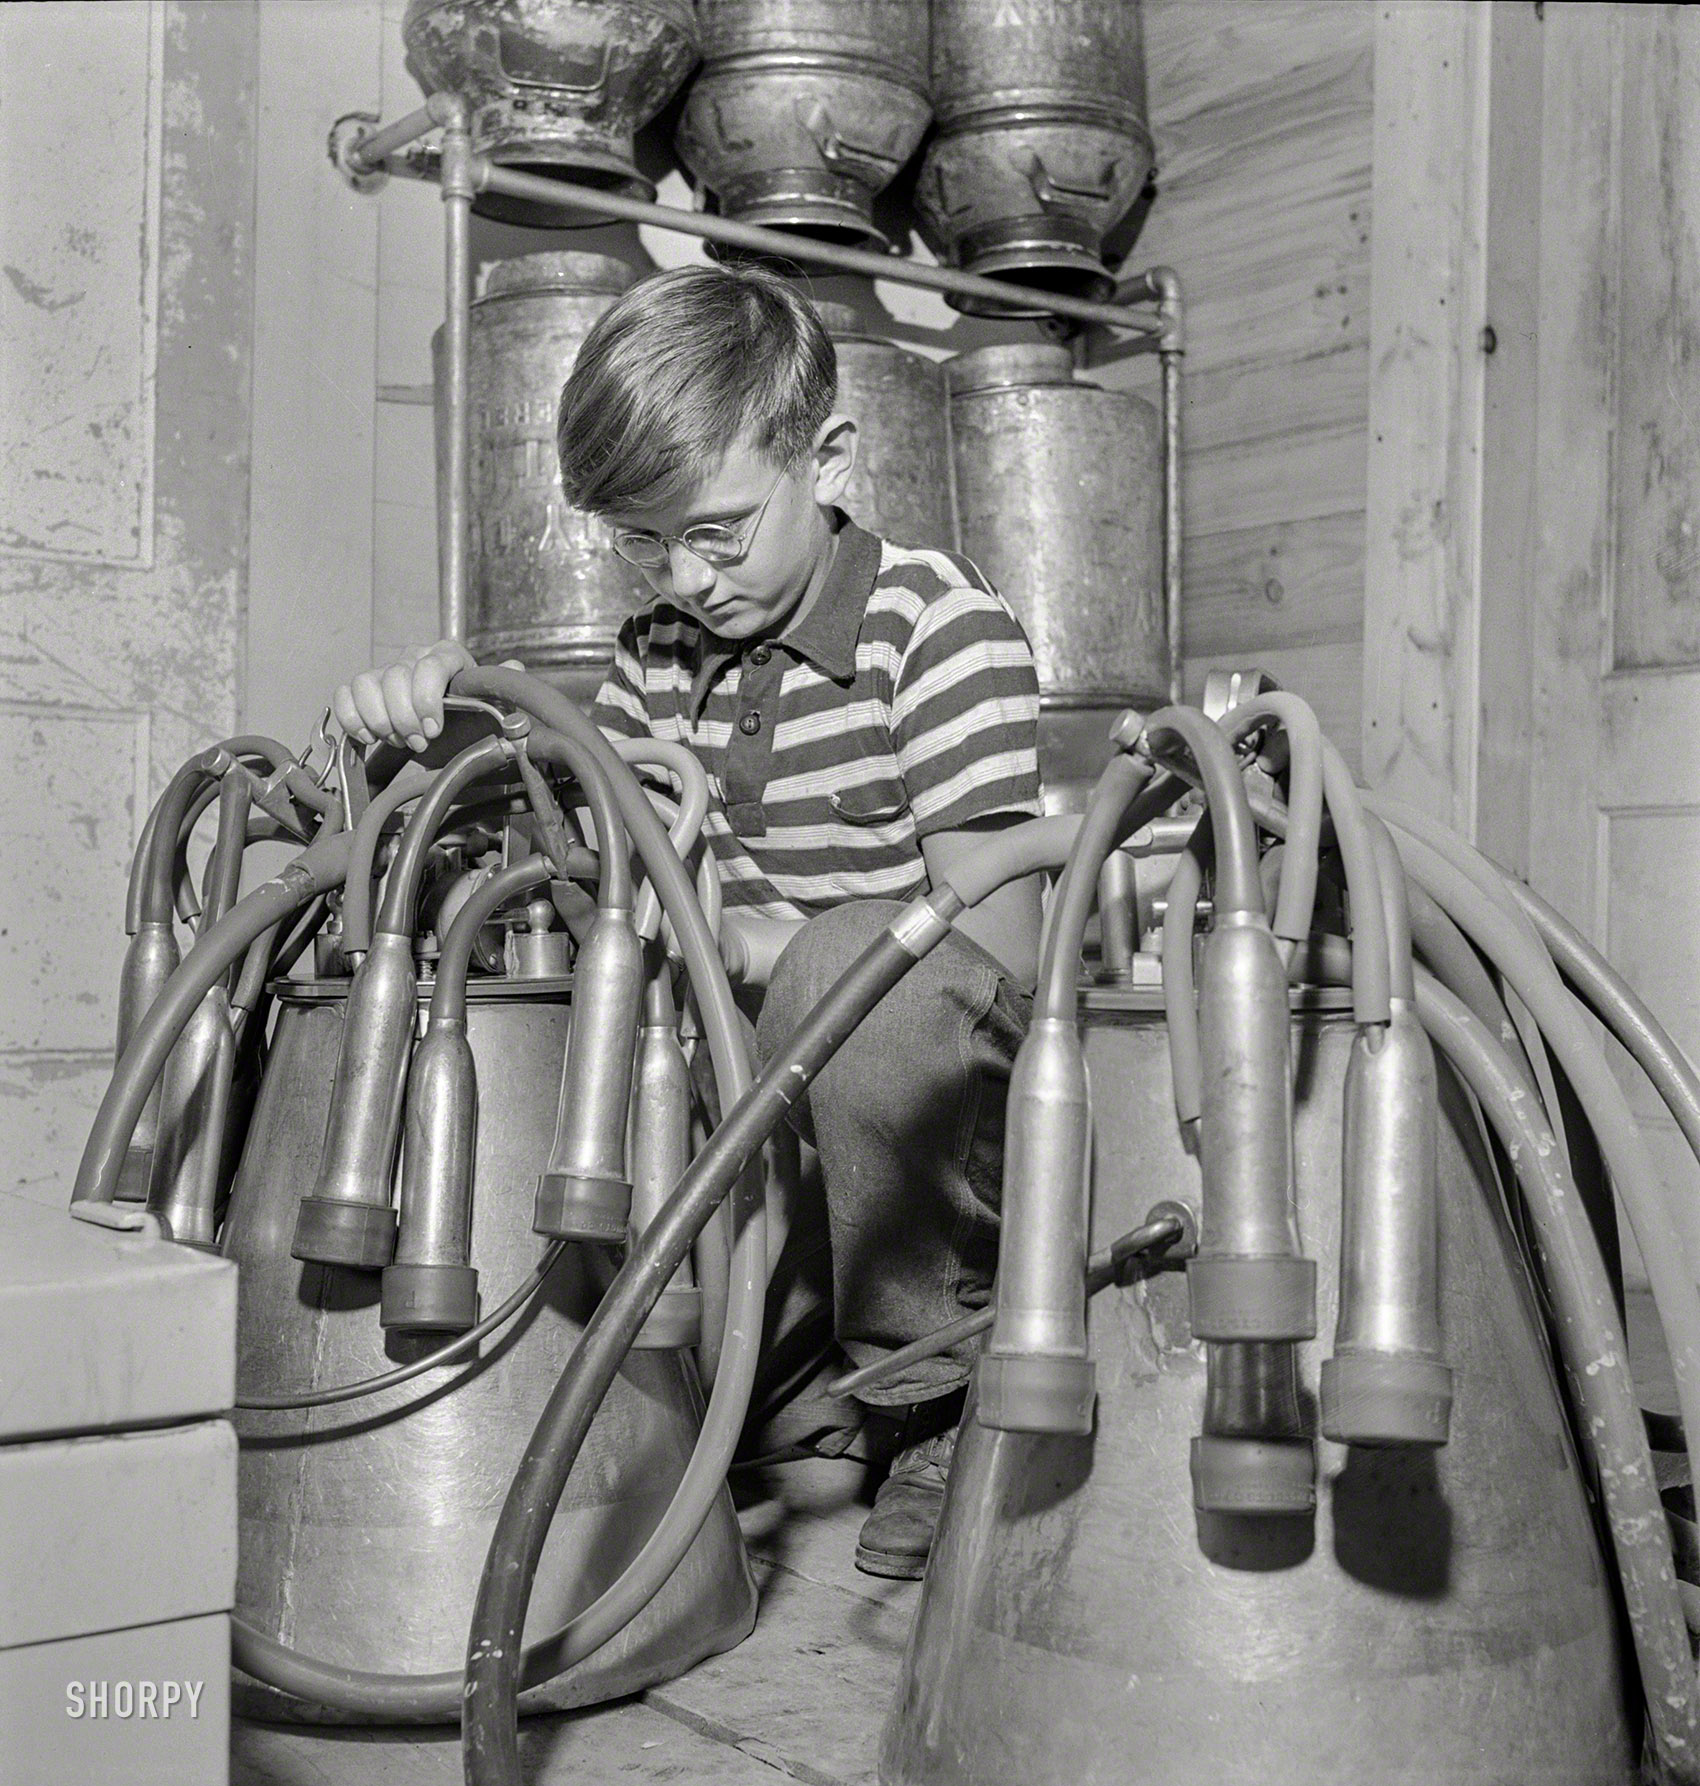 July 1942. East Montpelier, Vermont. "Conrad Ormsbee with automatic electric milkers. His father agreed to increase his Jersey herd from 25 to 30 milkers to aid in the Food for Freedom program." Photo by Fritz Henle. View full size.